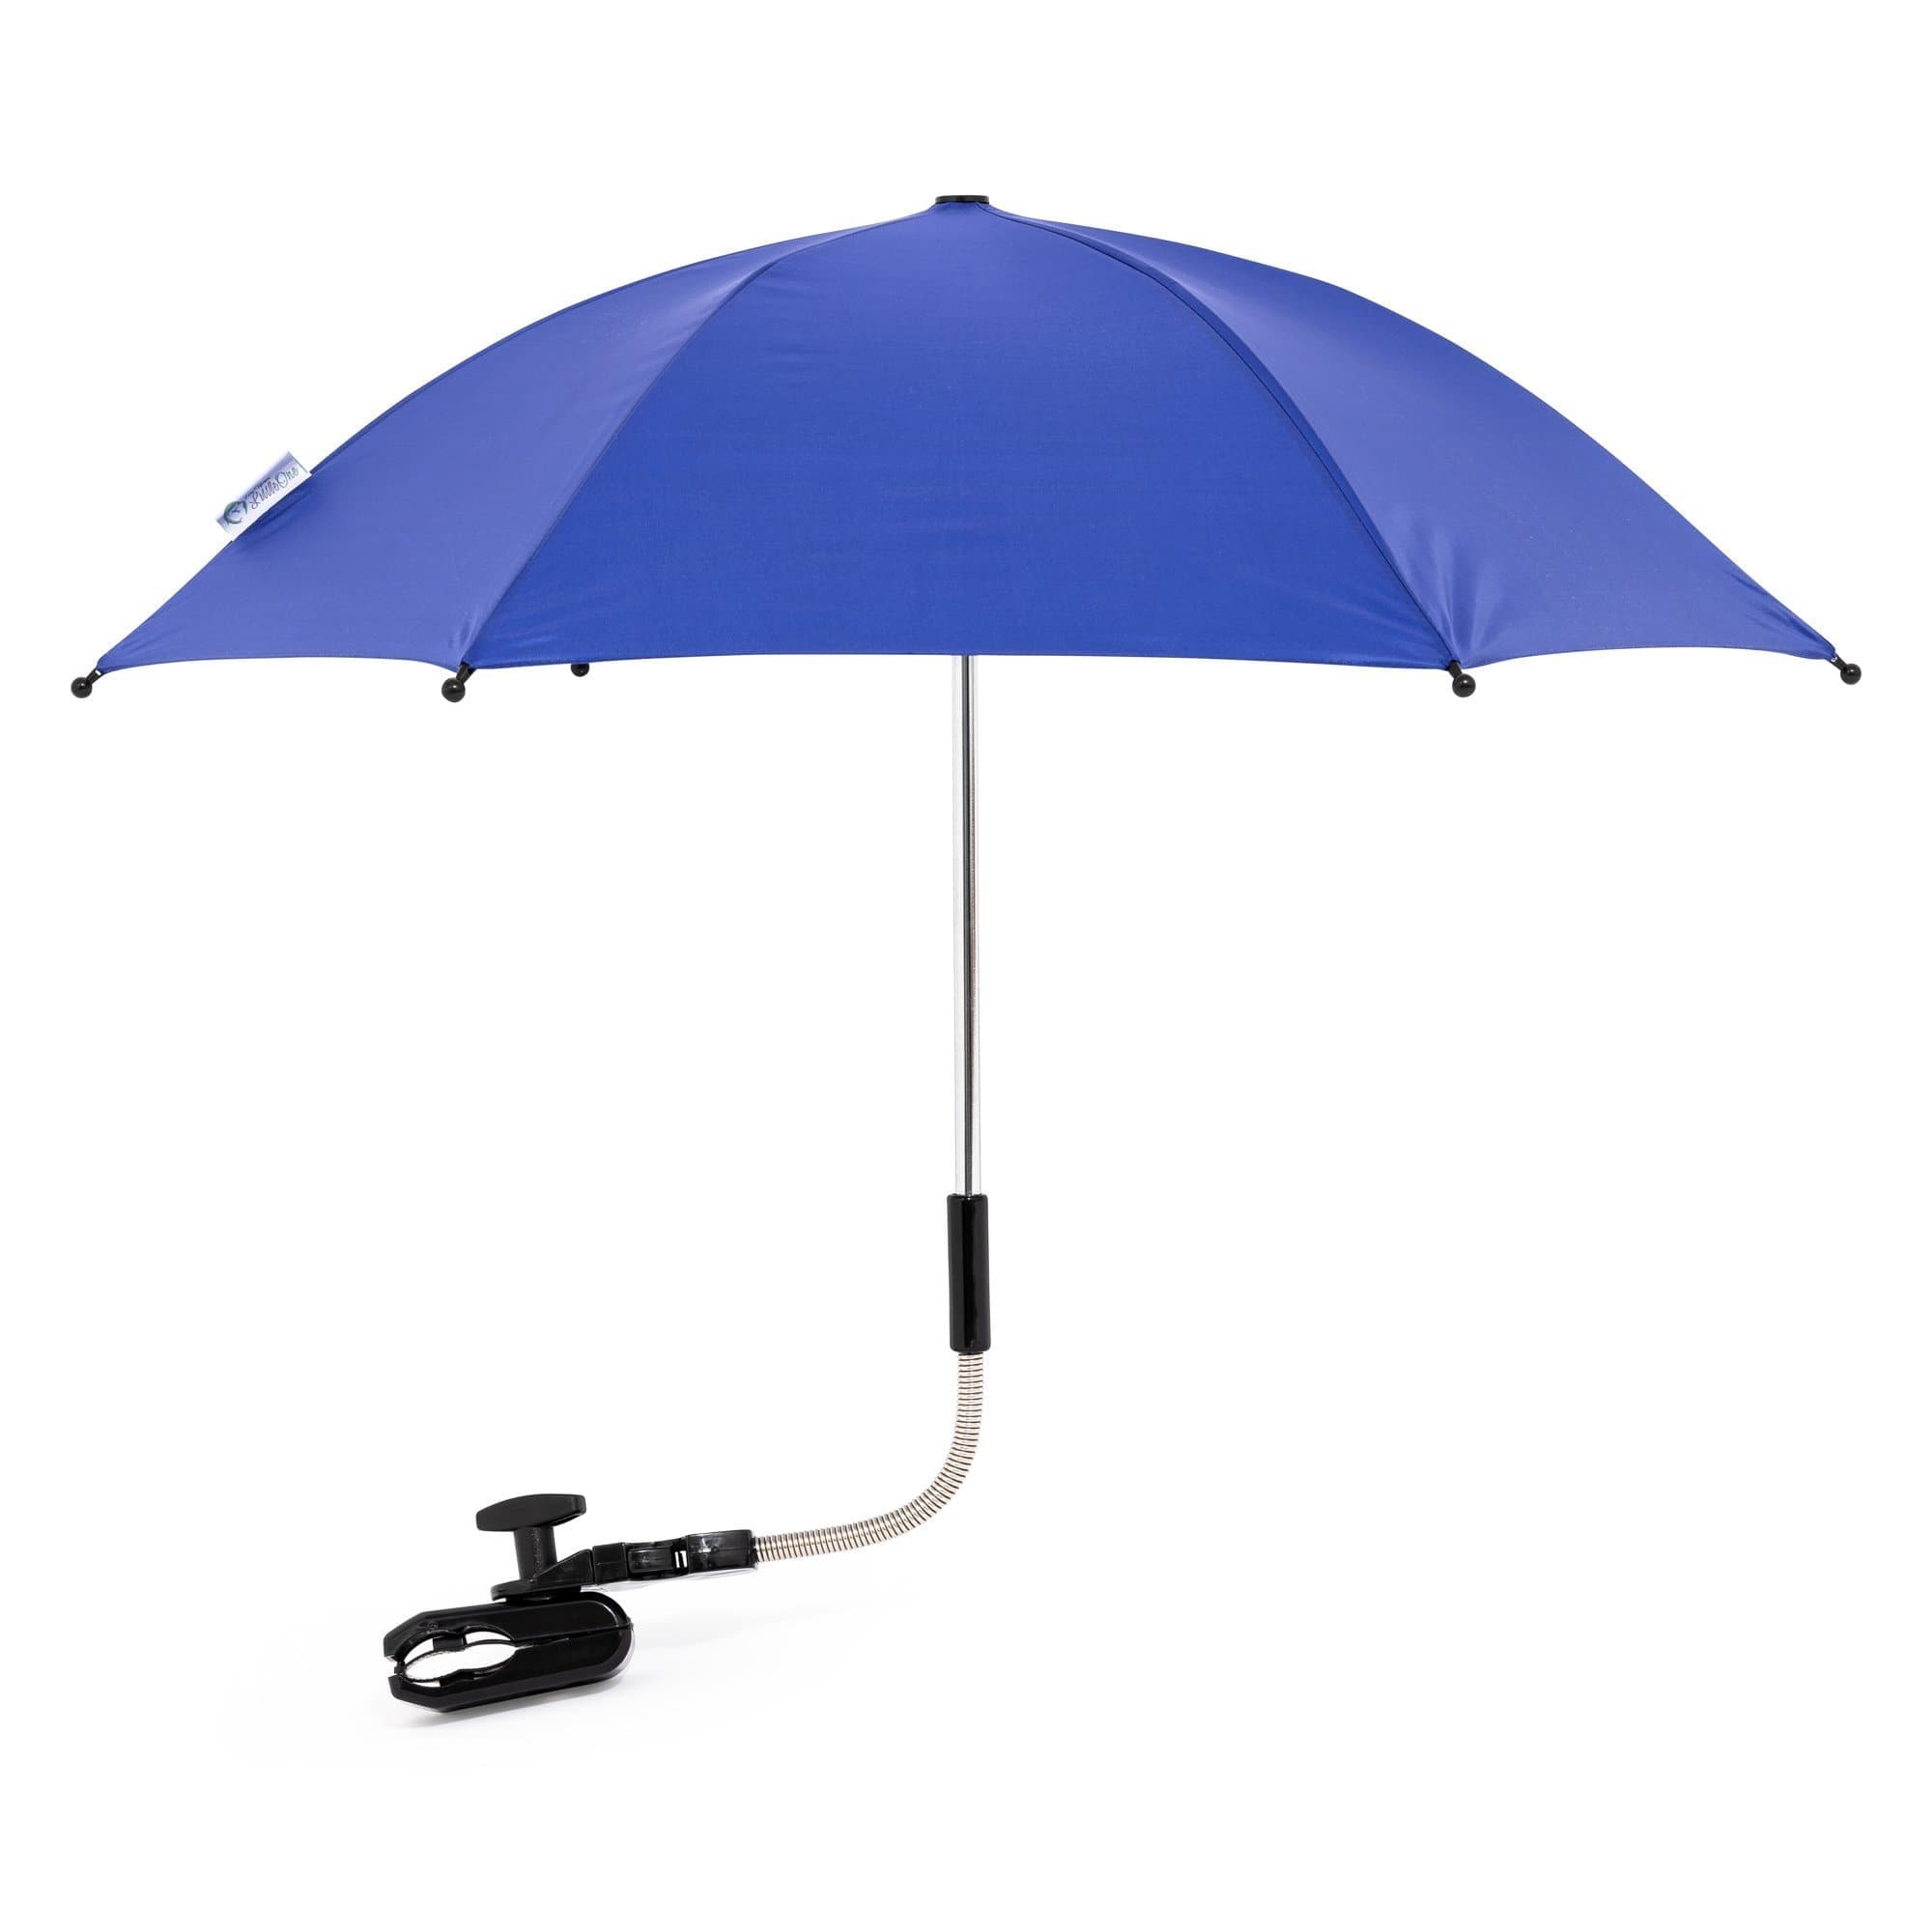 Baby Parasol Compatible With Casual - Fits All Models - For Your Little One